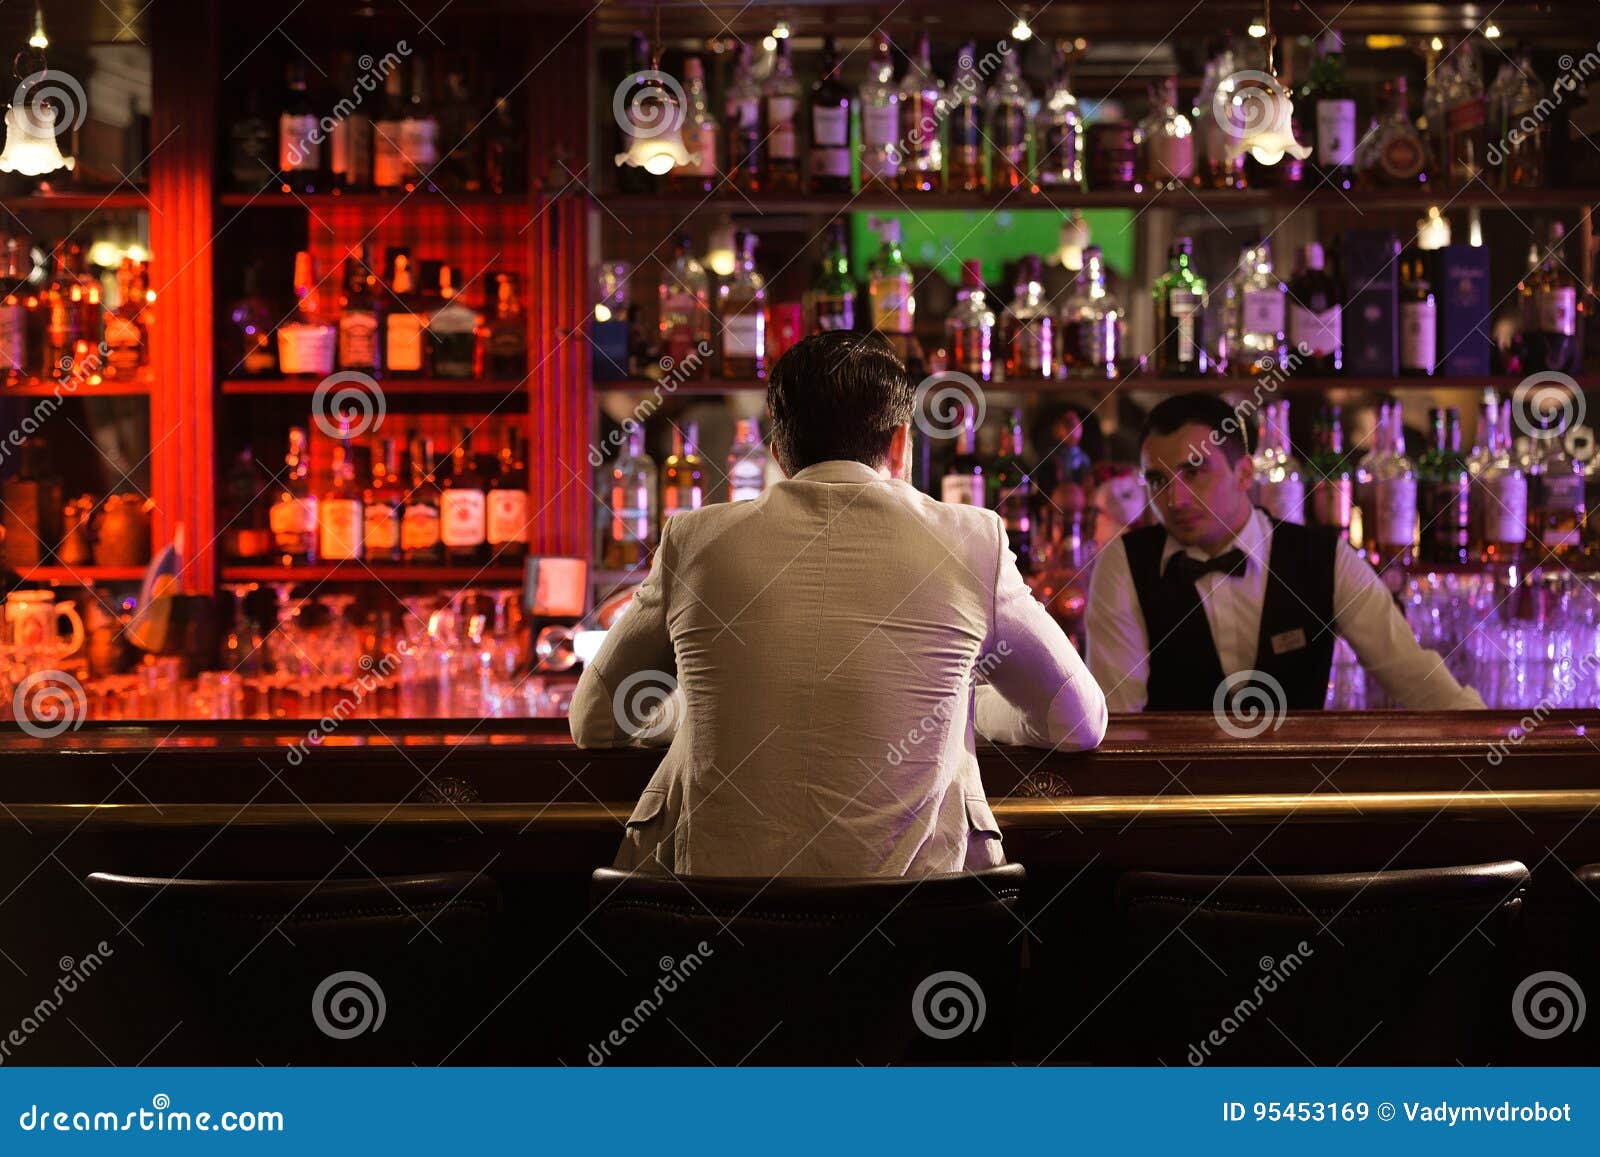 back view of a man ordering drink to a bartender